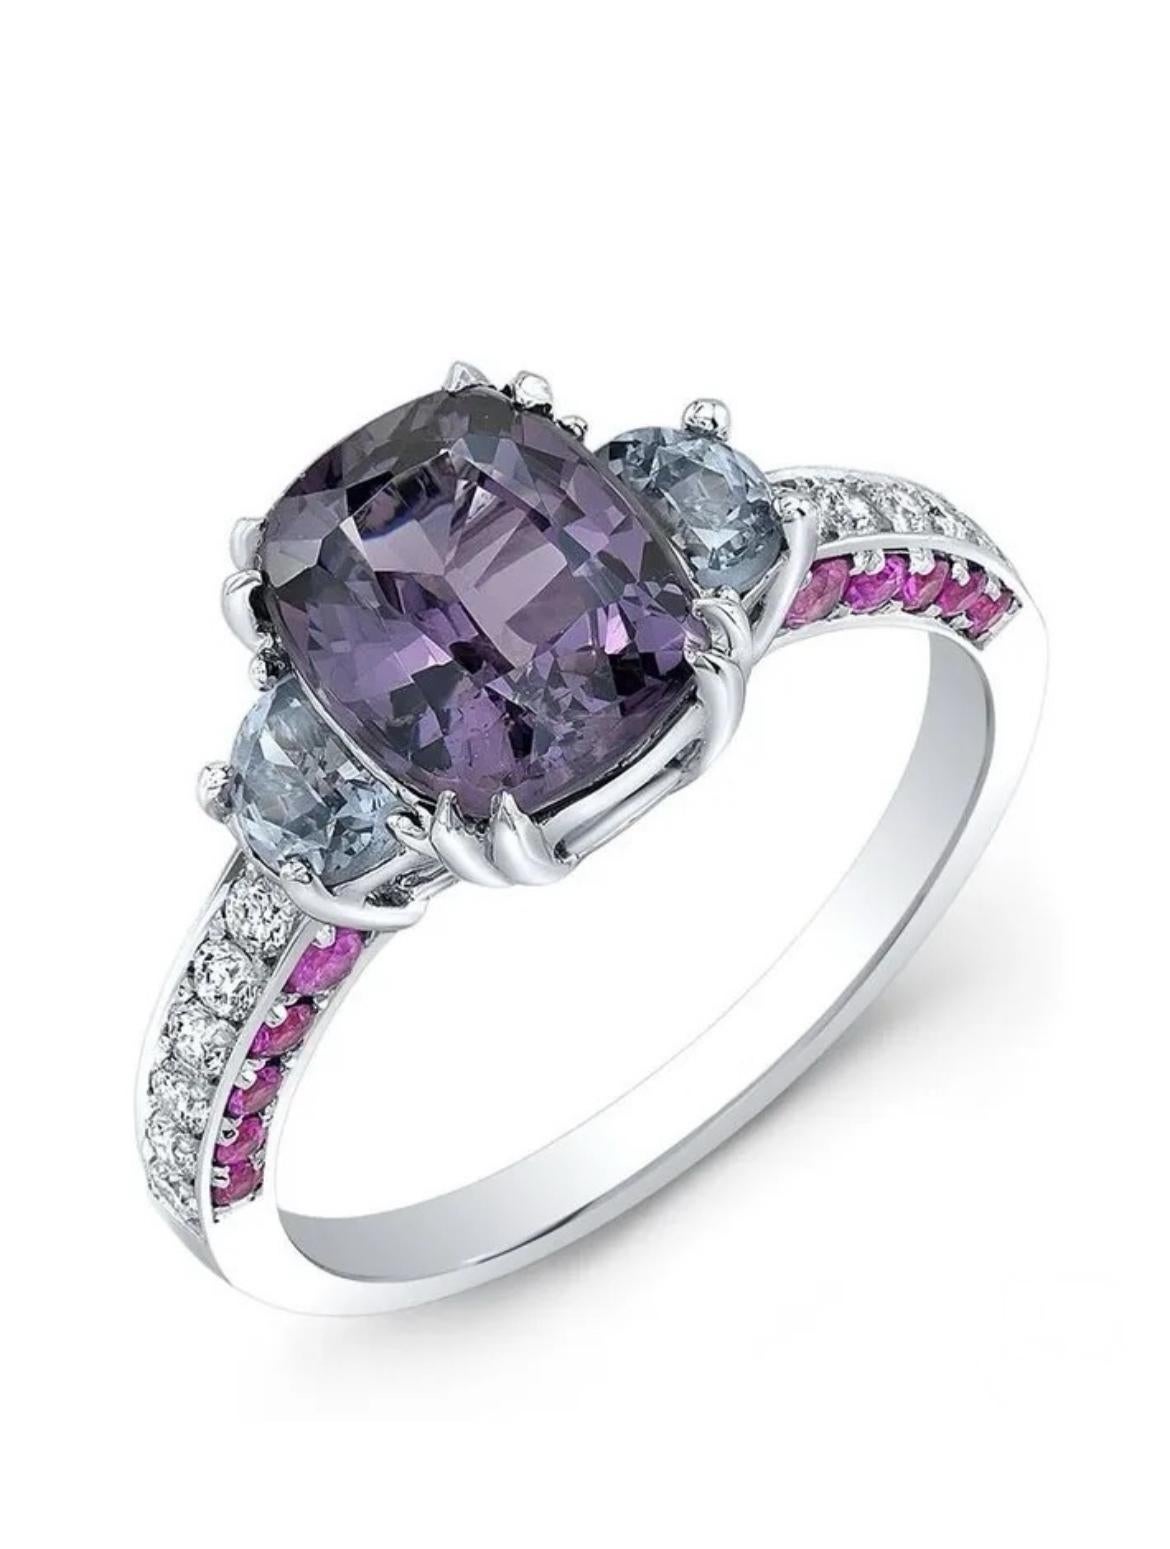 Modern 2.21ct cushion-cut Burmese Purple-Gray Spinel and Ceylon Pink Sapphire ring. For Sale